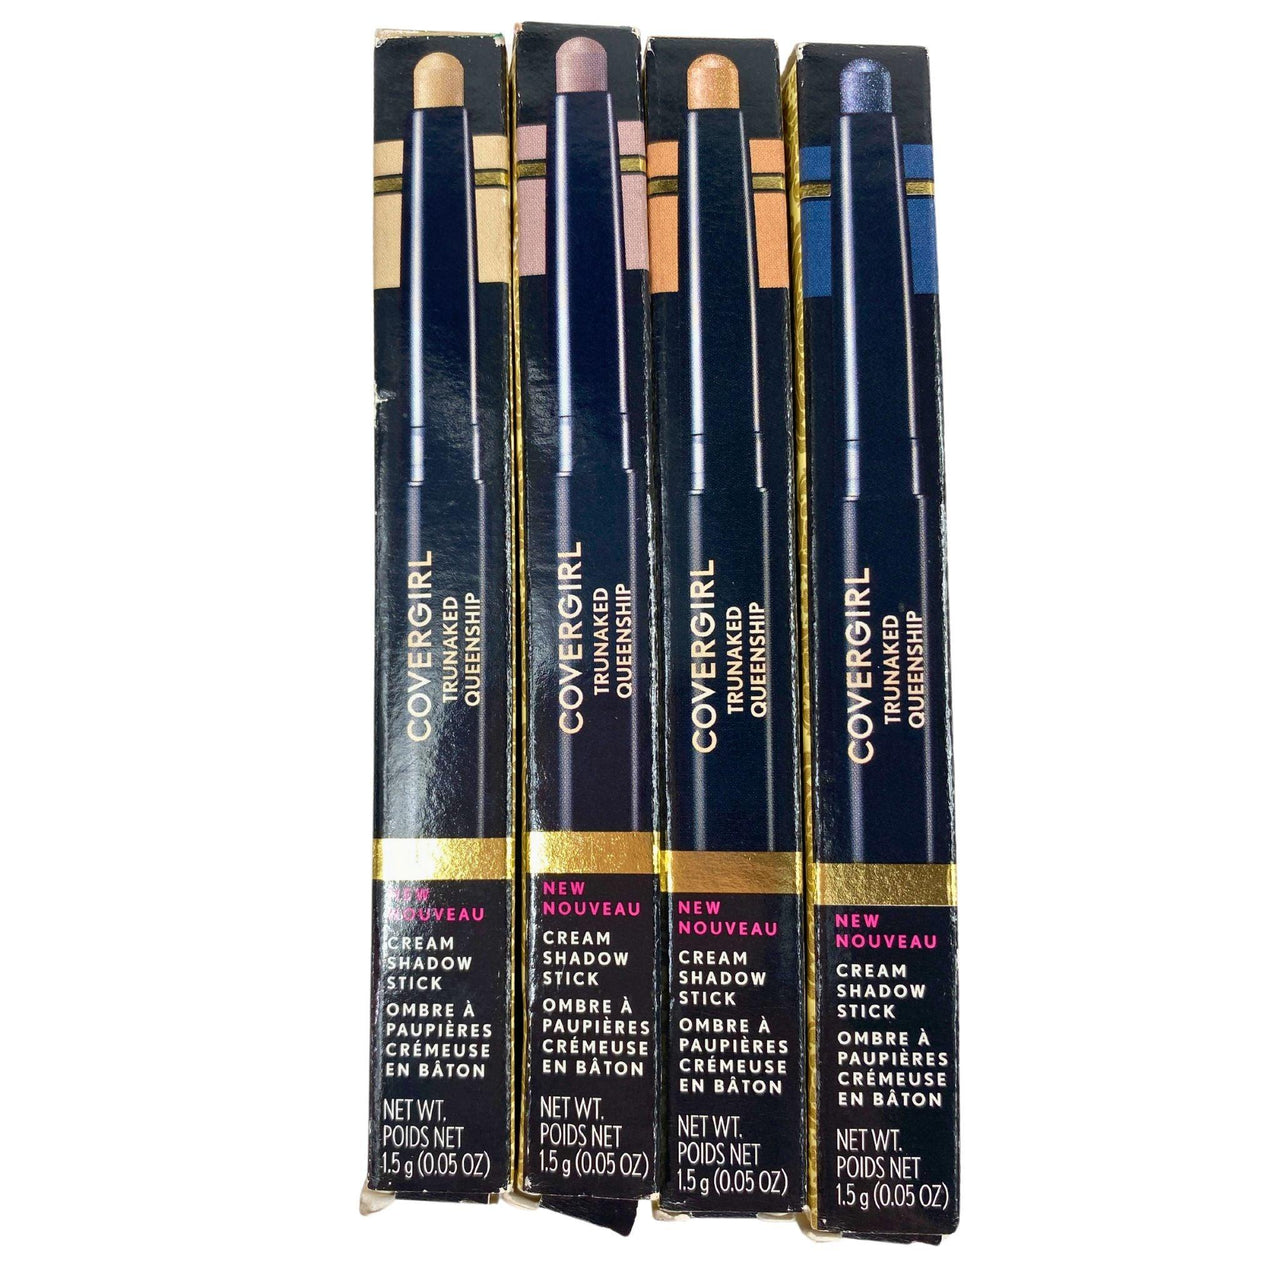 Covergirl Trunaked Queenship Cream Shadow Stick Assorted Mix 0.05OZ (28 Pcs Lot) - Discount Wholesalers Inc